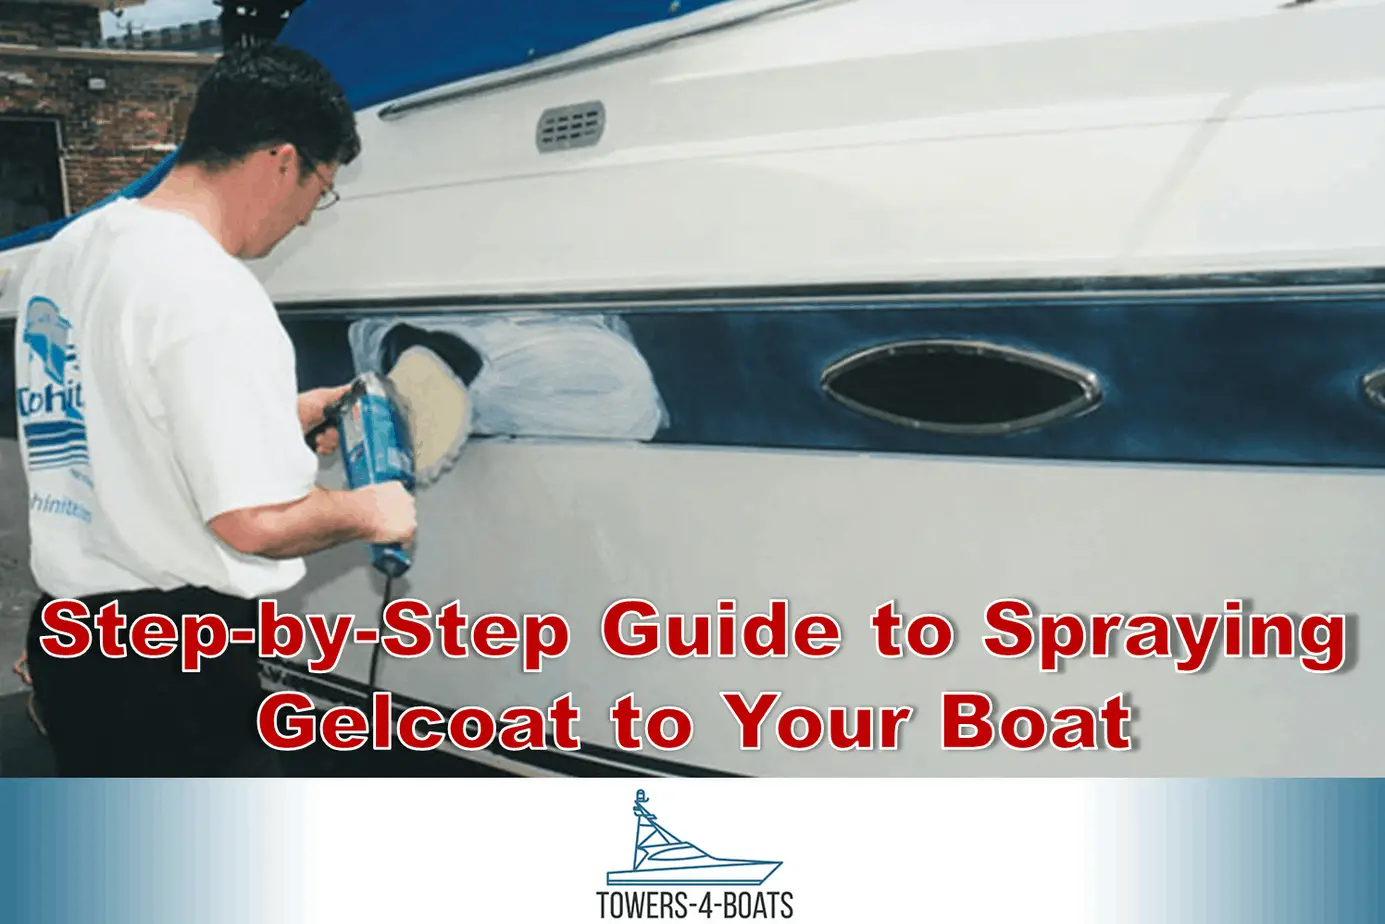 You are currently viewing Step-by-Step Guide to Spraying Gelcoat to Your Boat